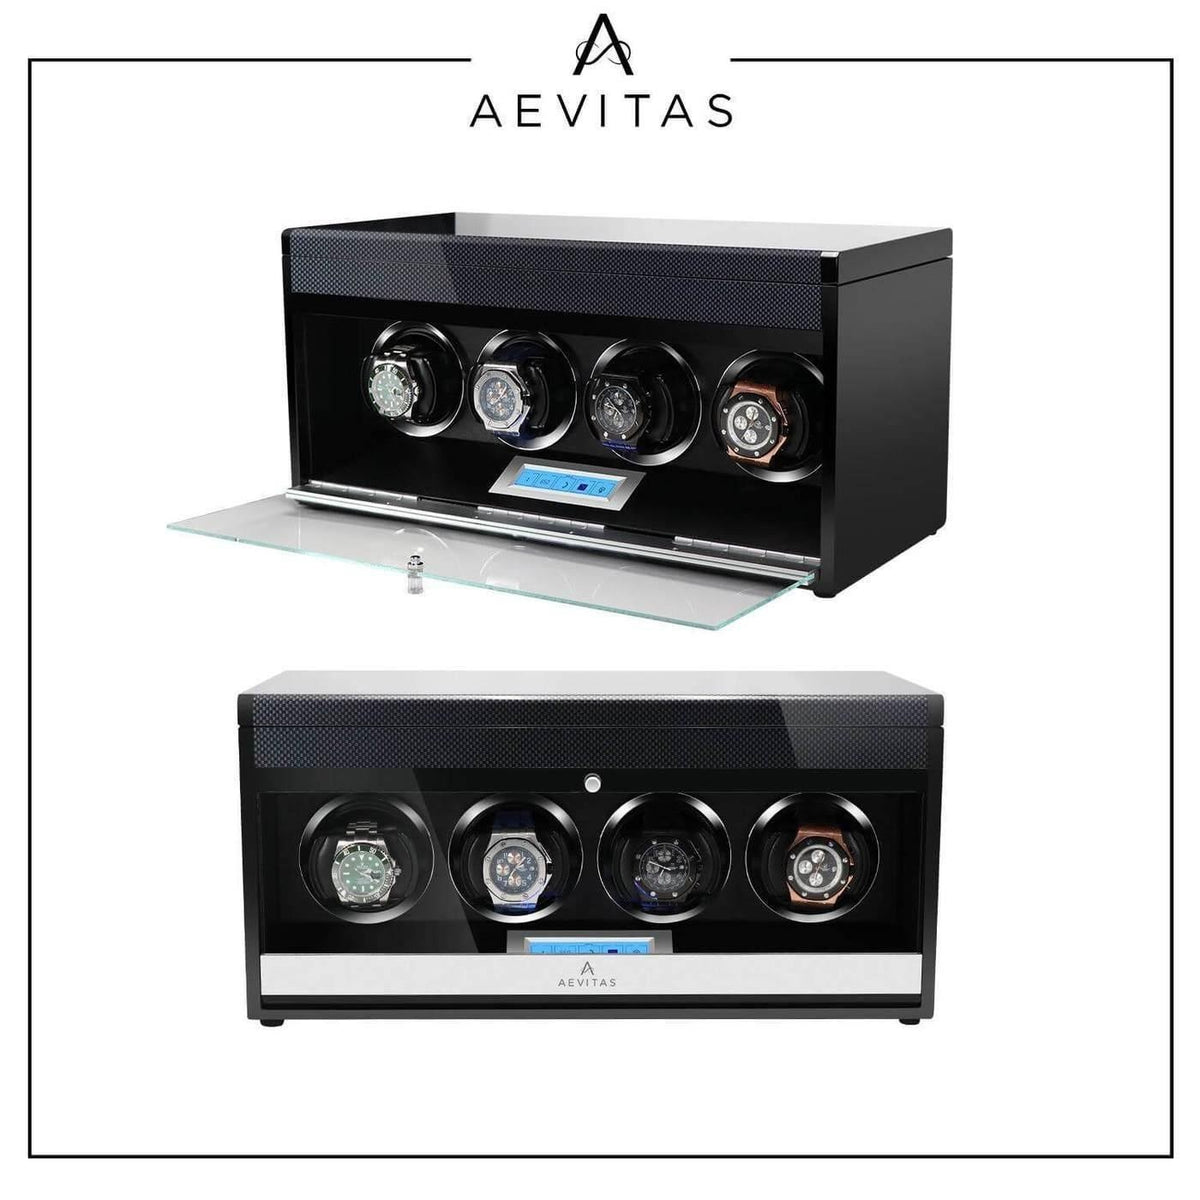 Automatic 4 Watch Winder in Carbon Fibre Finish by Aevitas